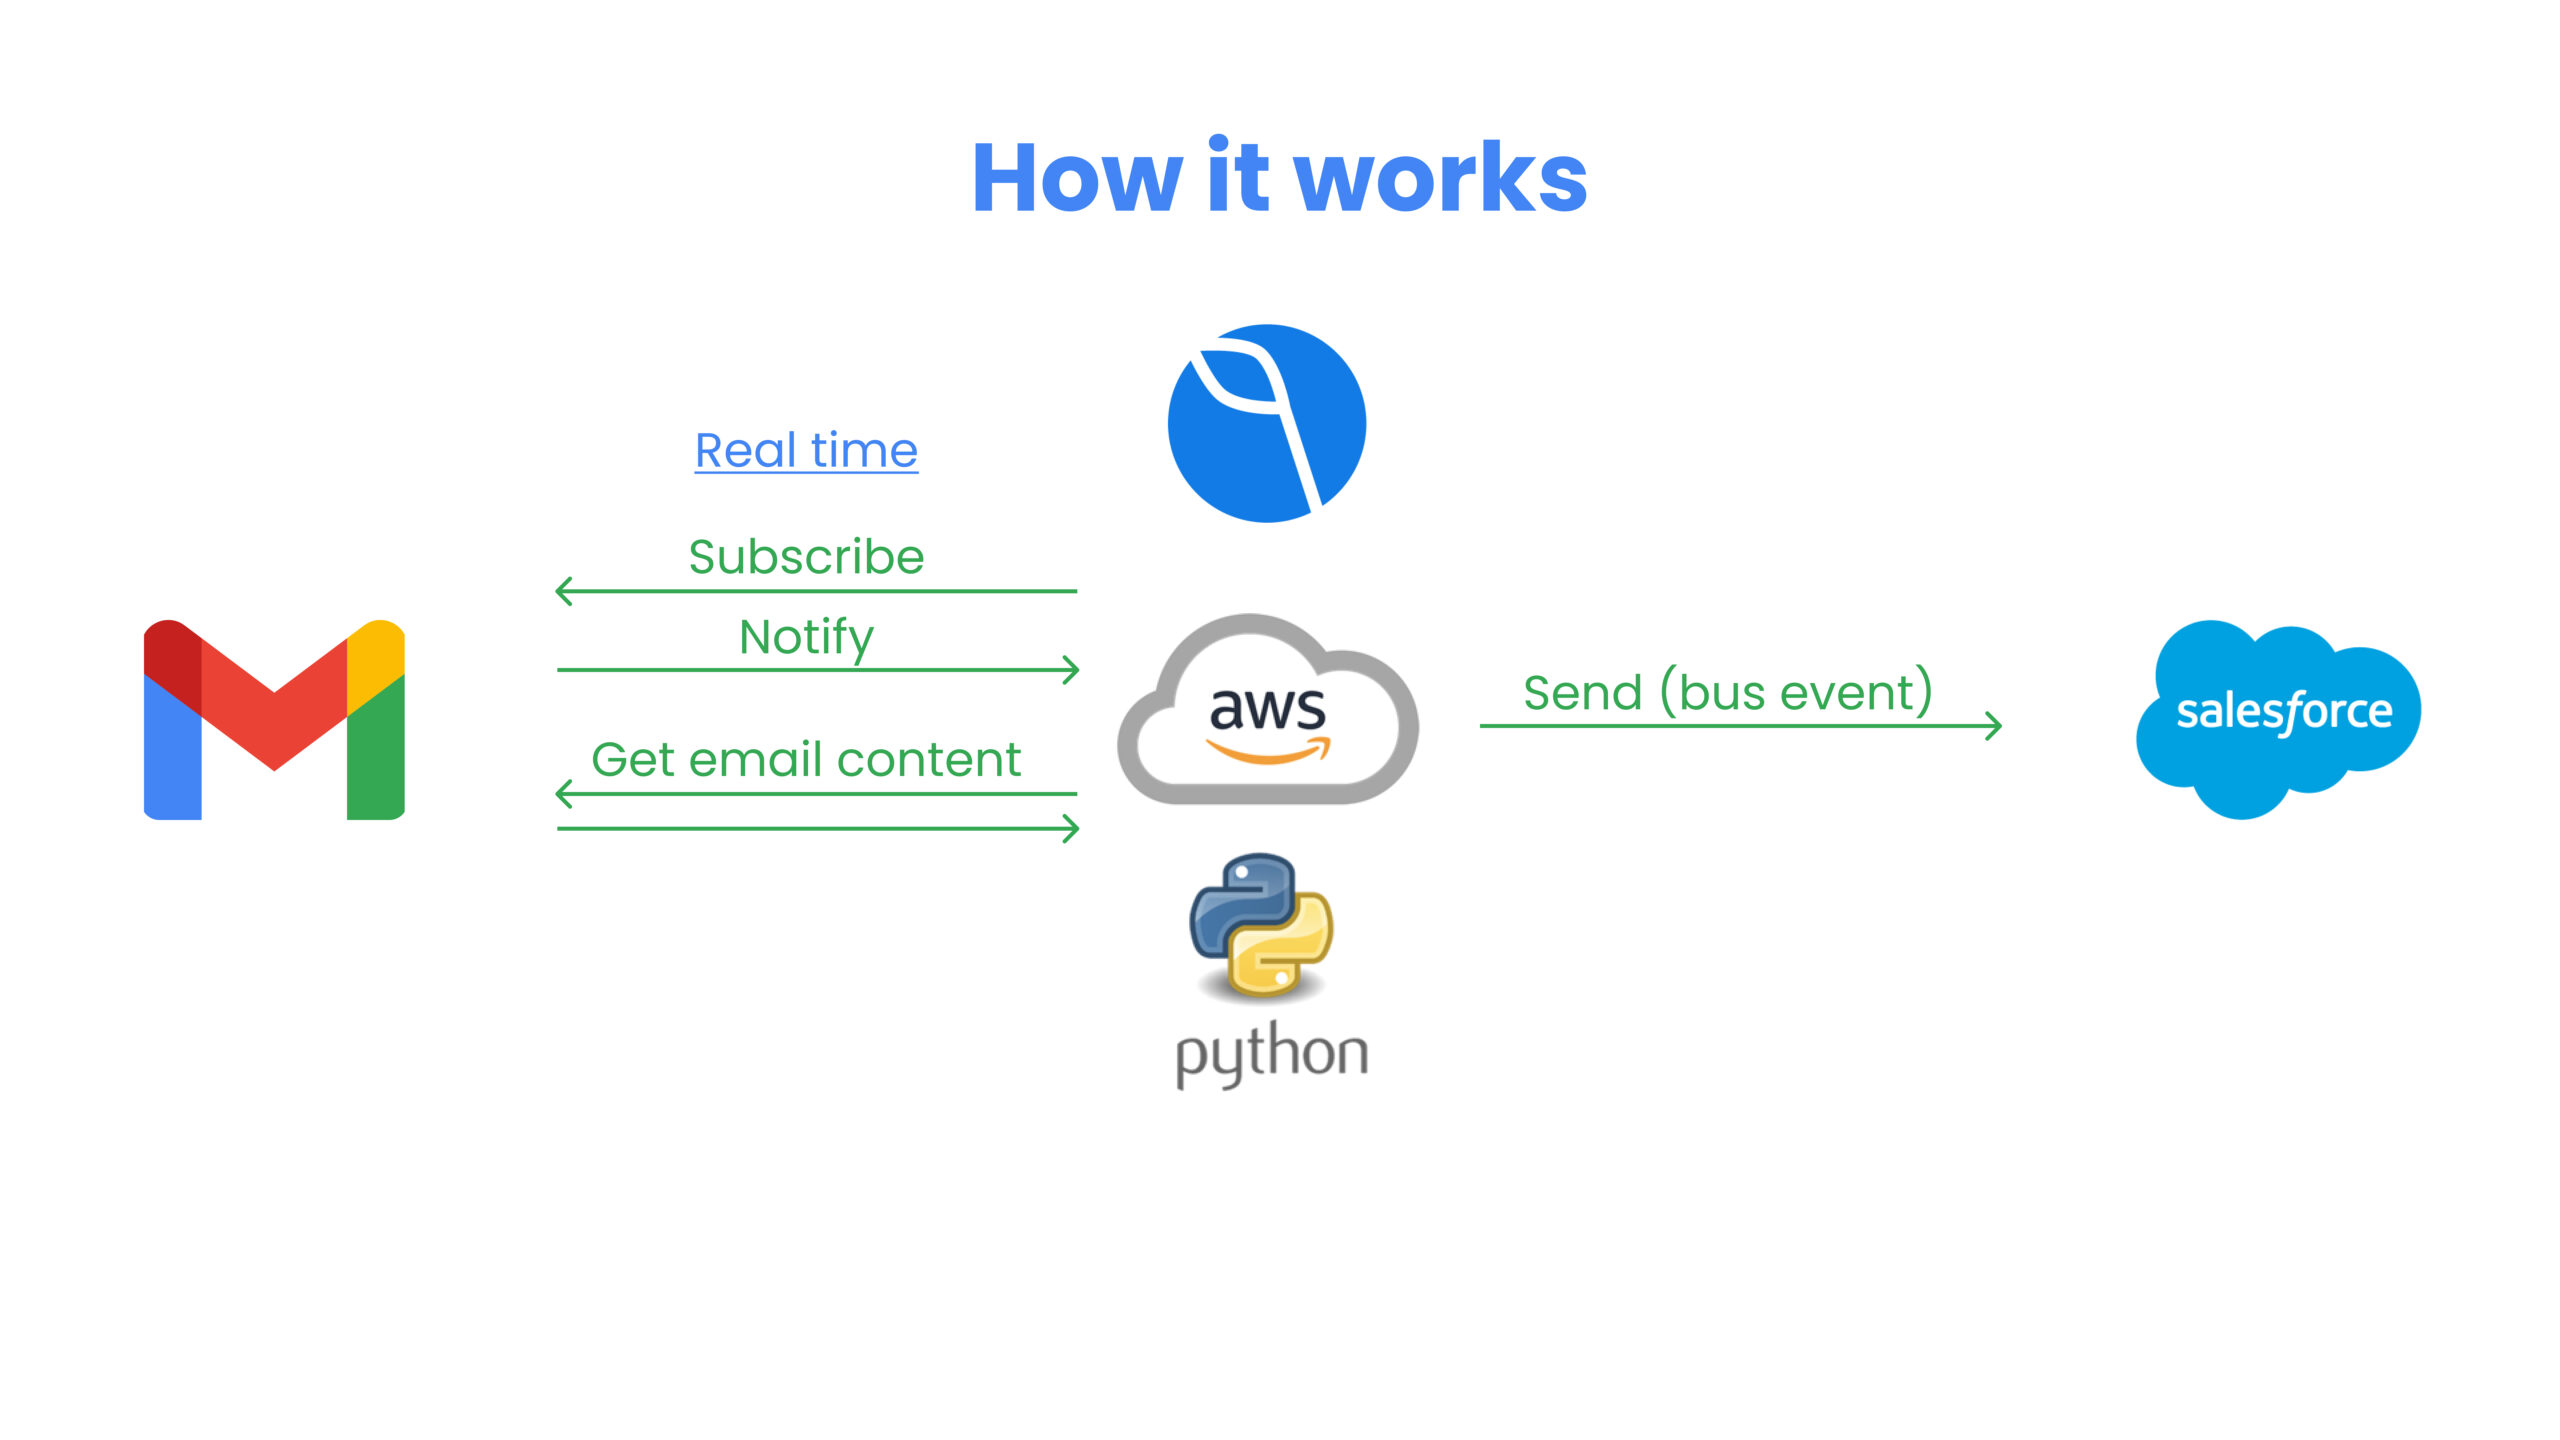 Delpha has built a connector with AWS and Python to sync your email content and data inside Salesforce